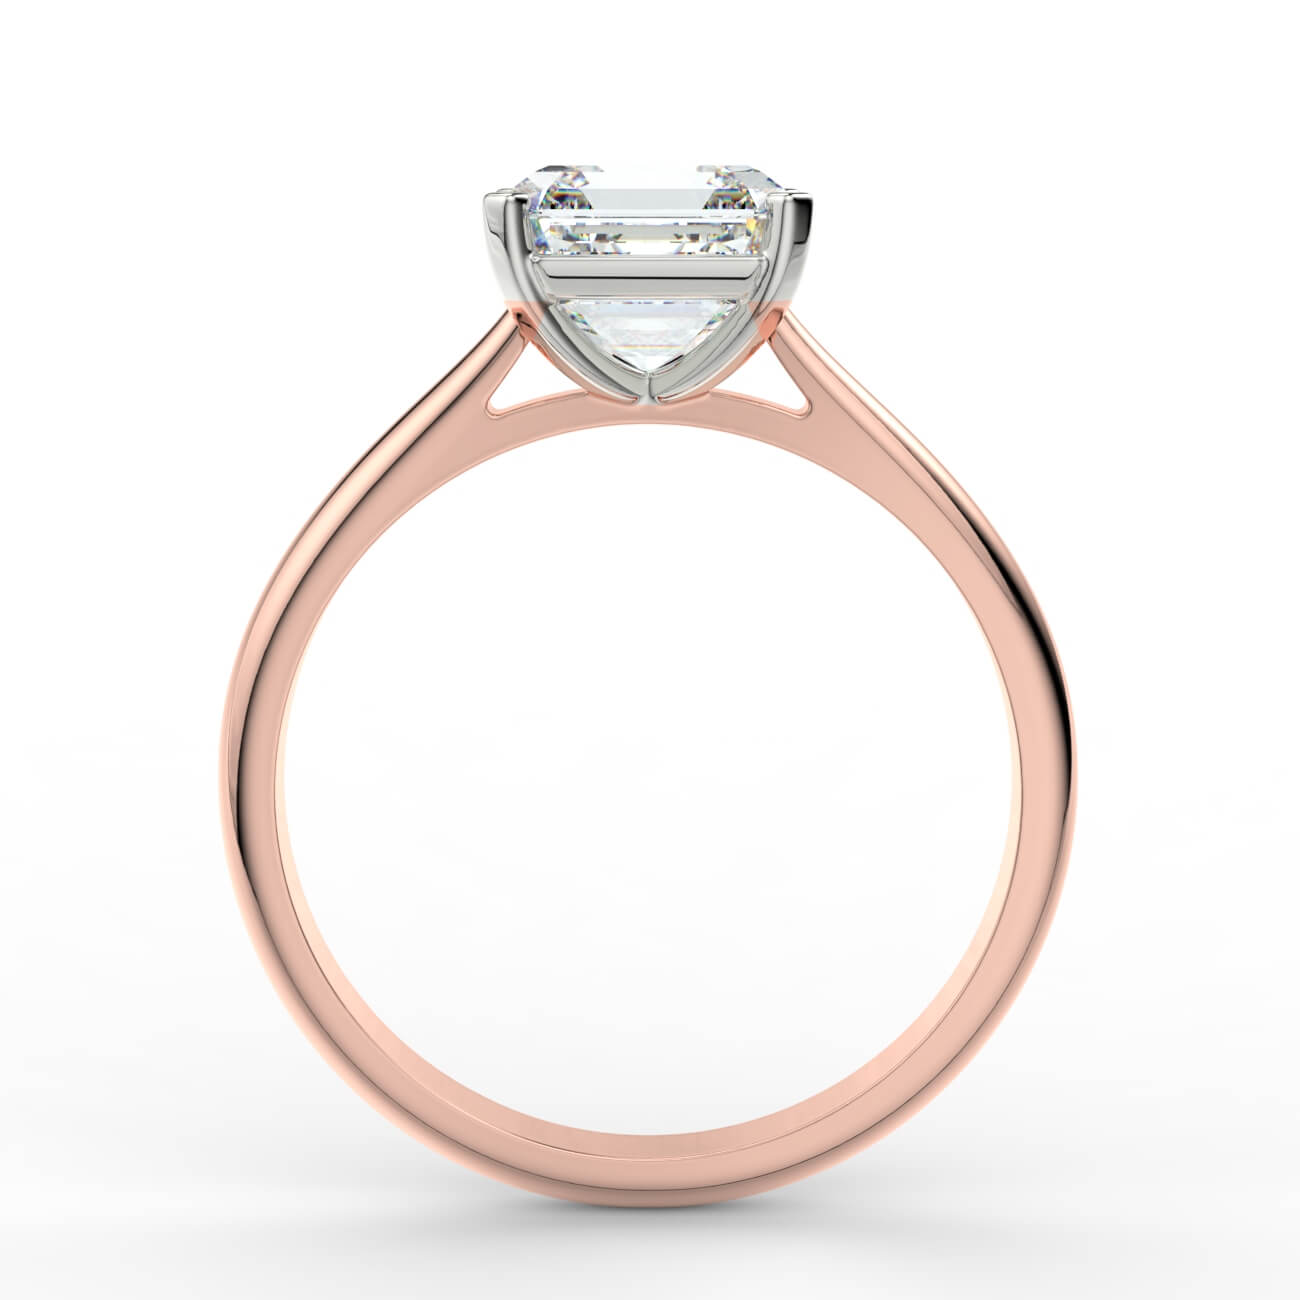 Asscher cut diamond cathedral engagement ring in rose and white gold – Australian Diamond Network